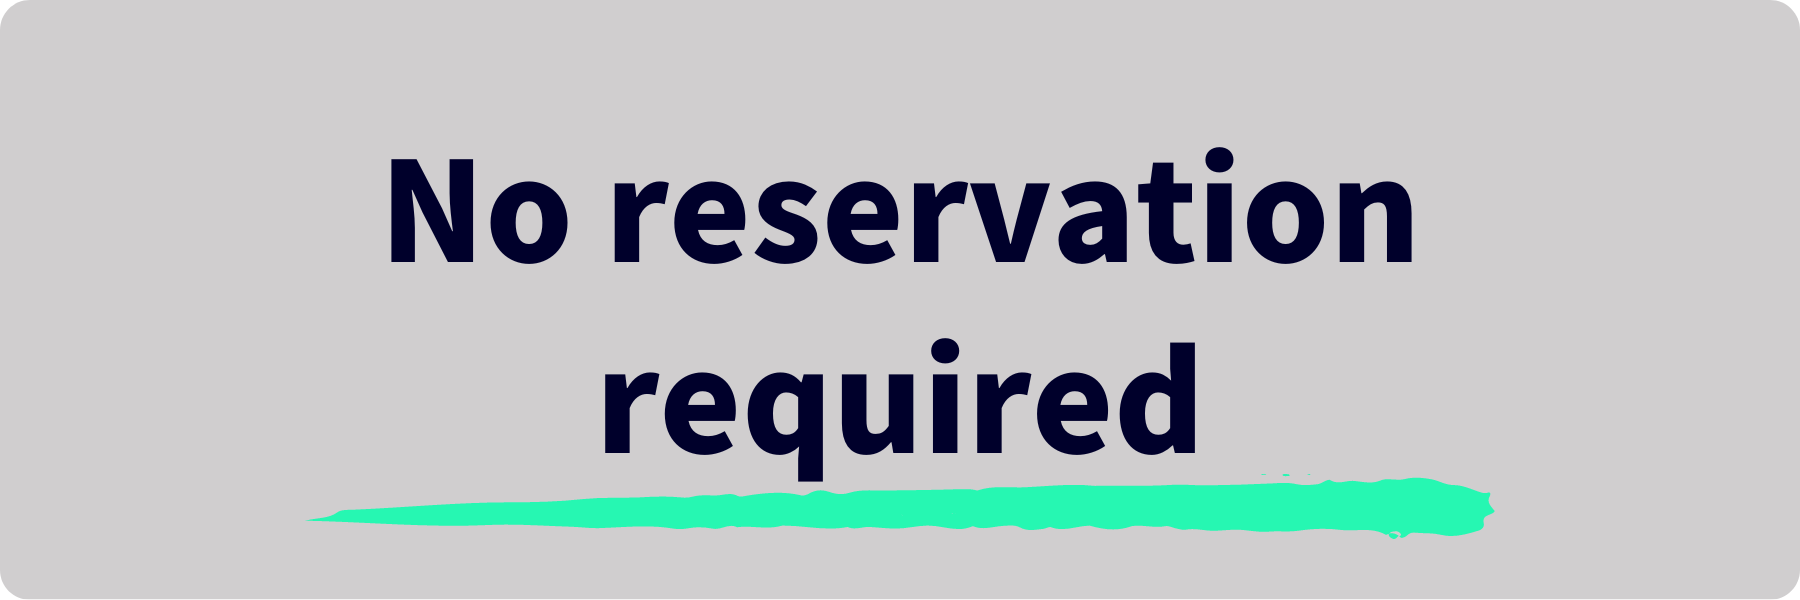 no reservation required